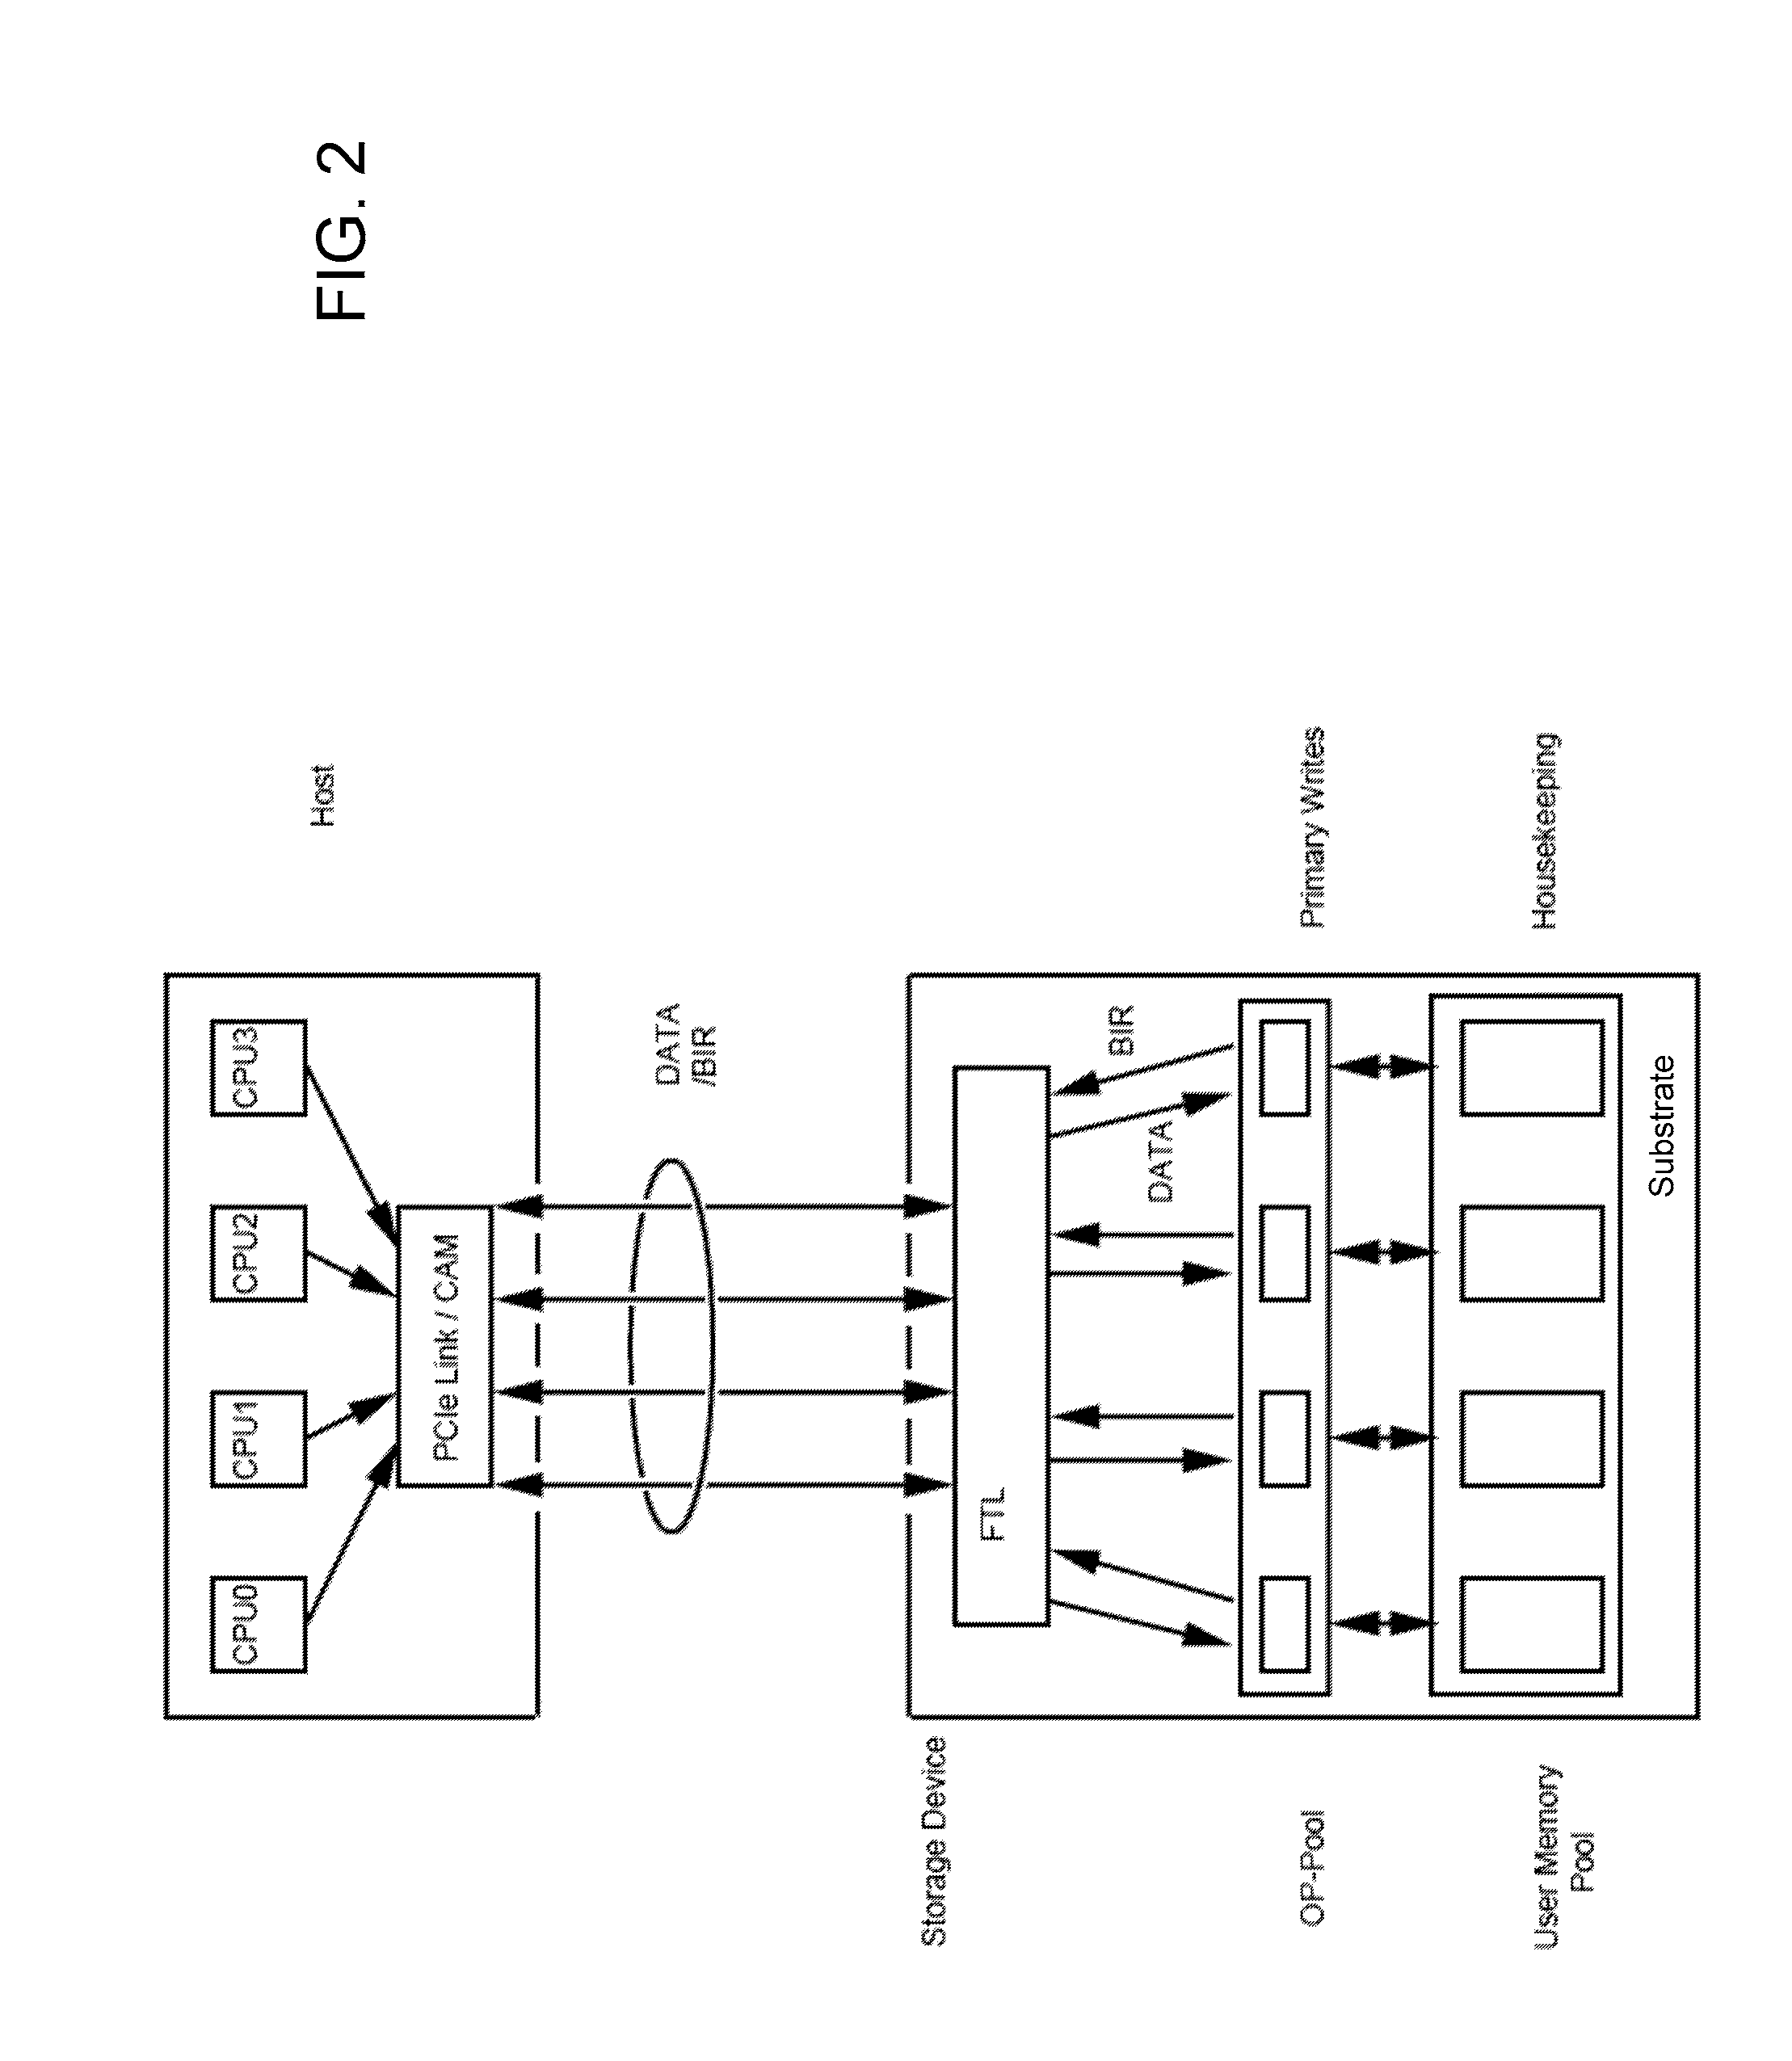 Non-volatile memory-based mass storage devices and methods for writing data thereto